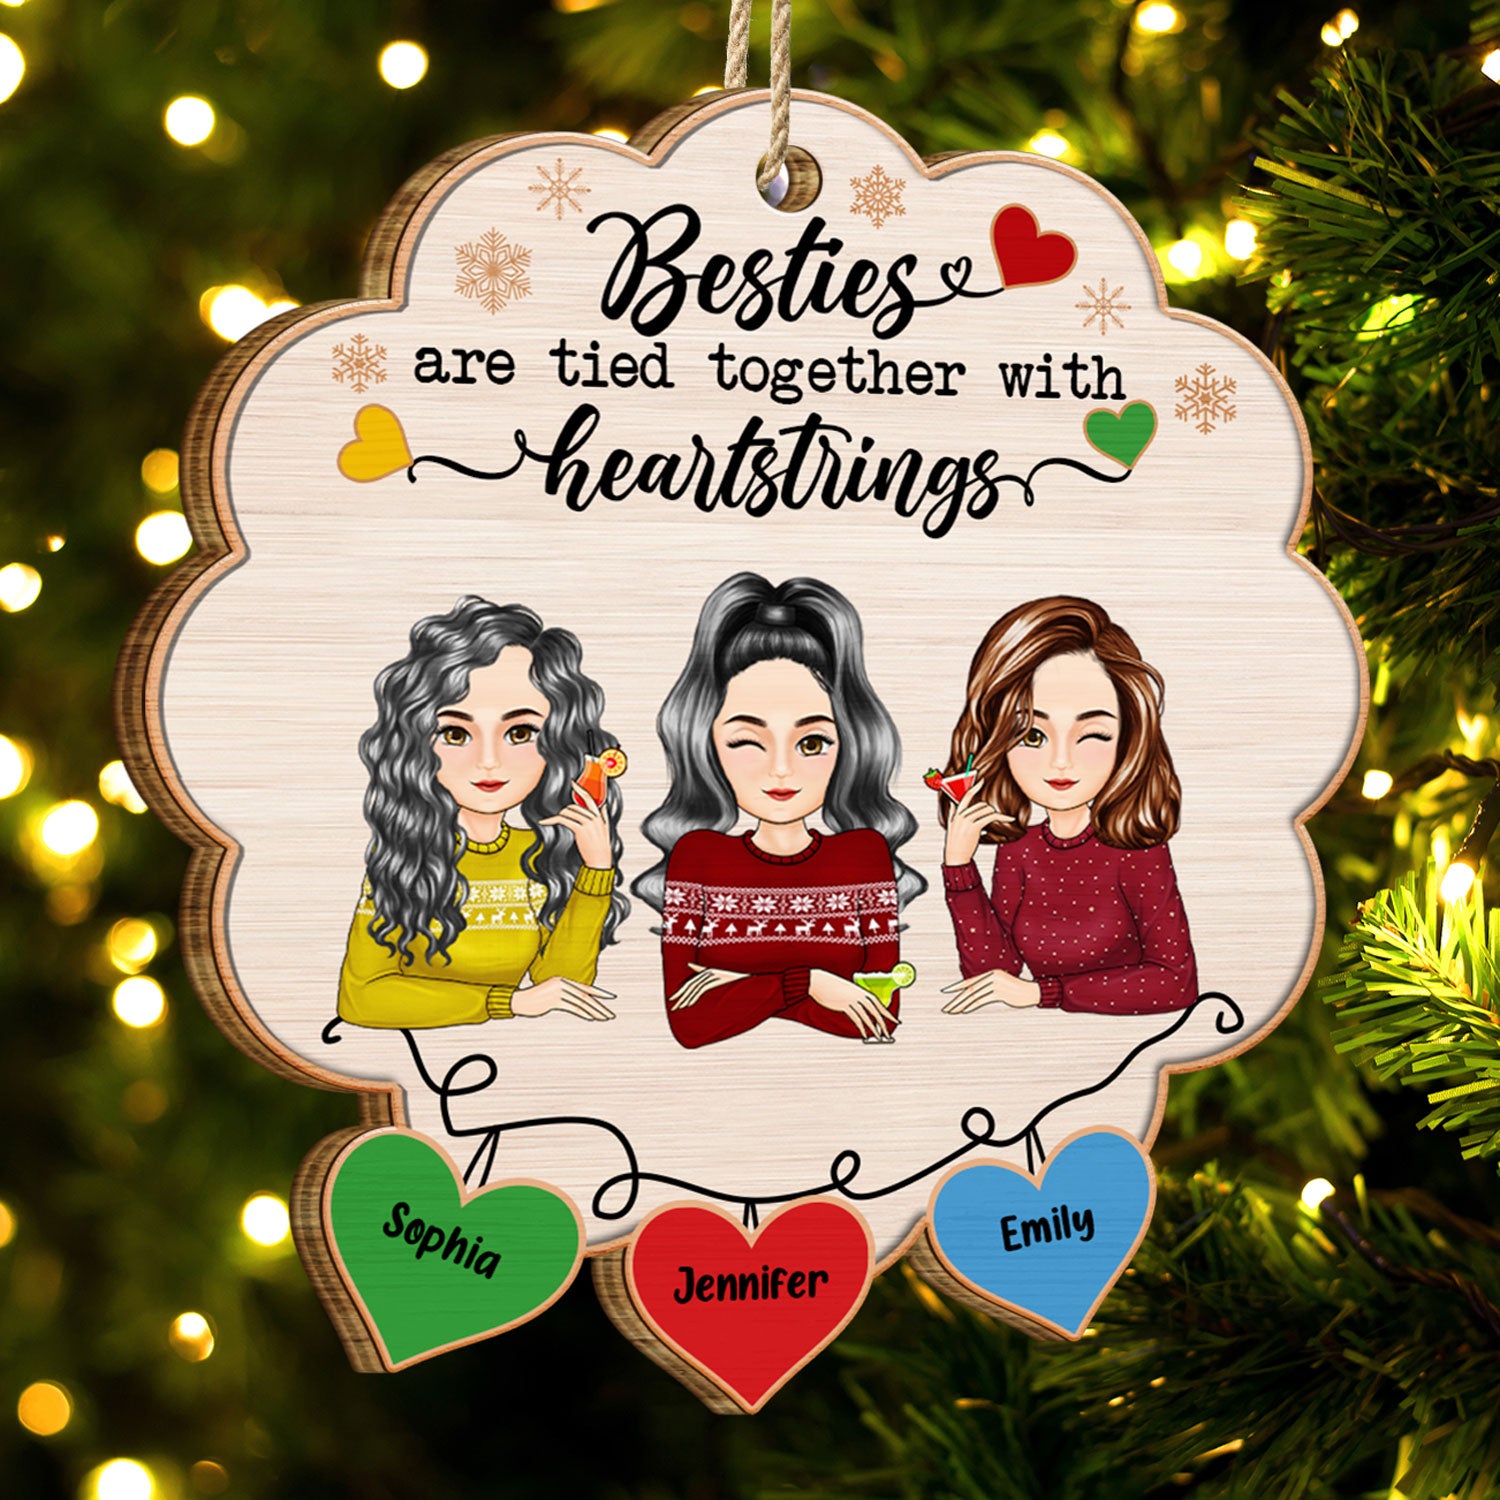 Besties Are Tied Together With Heartstrings - Christmas Gift For BFF Best Friends, Sisters - Personalized Custom Shaped Wooden Ornament